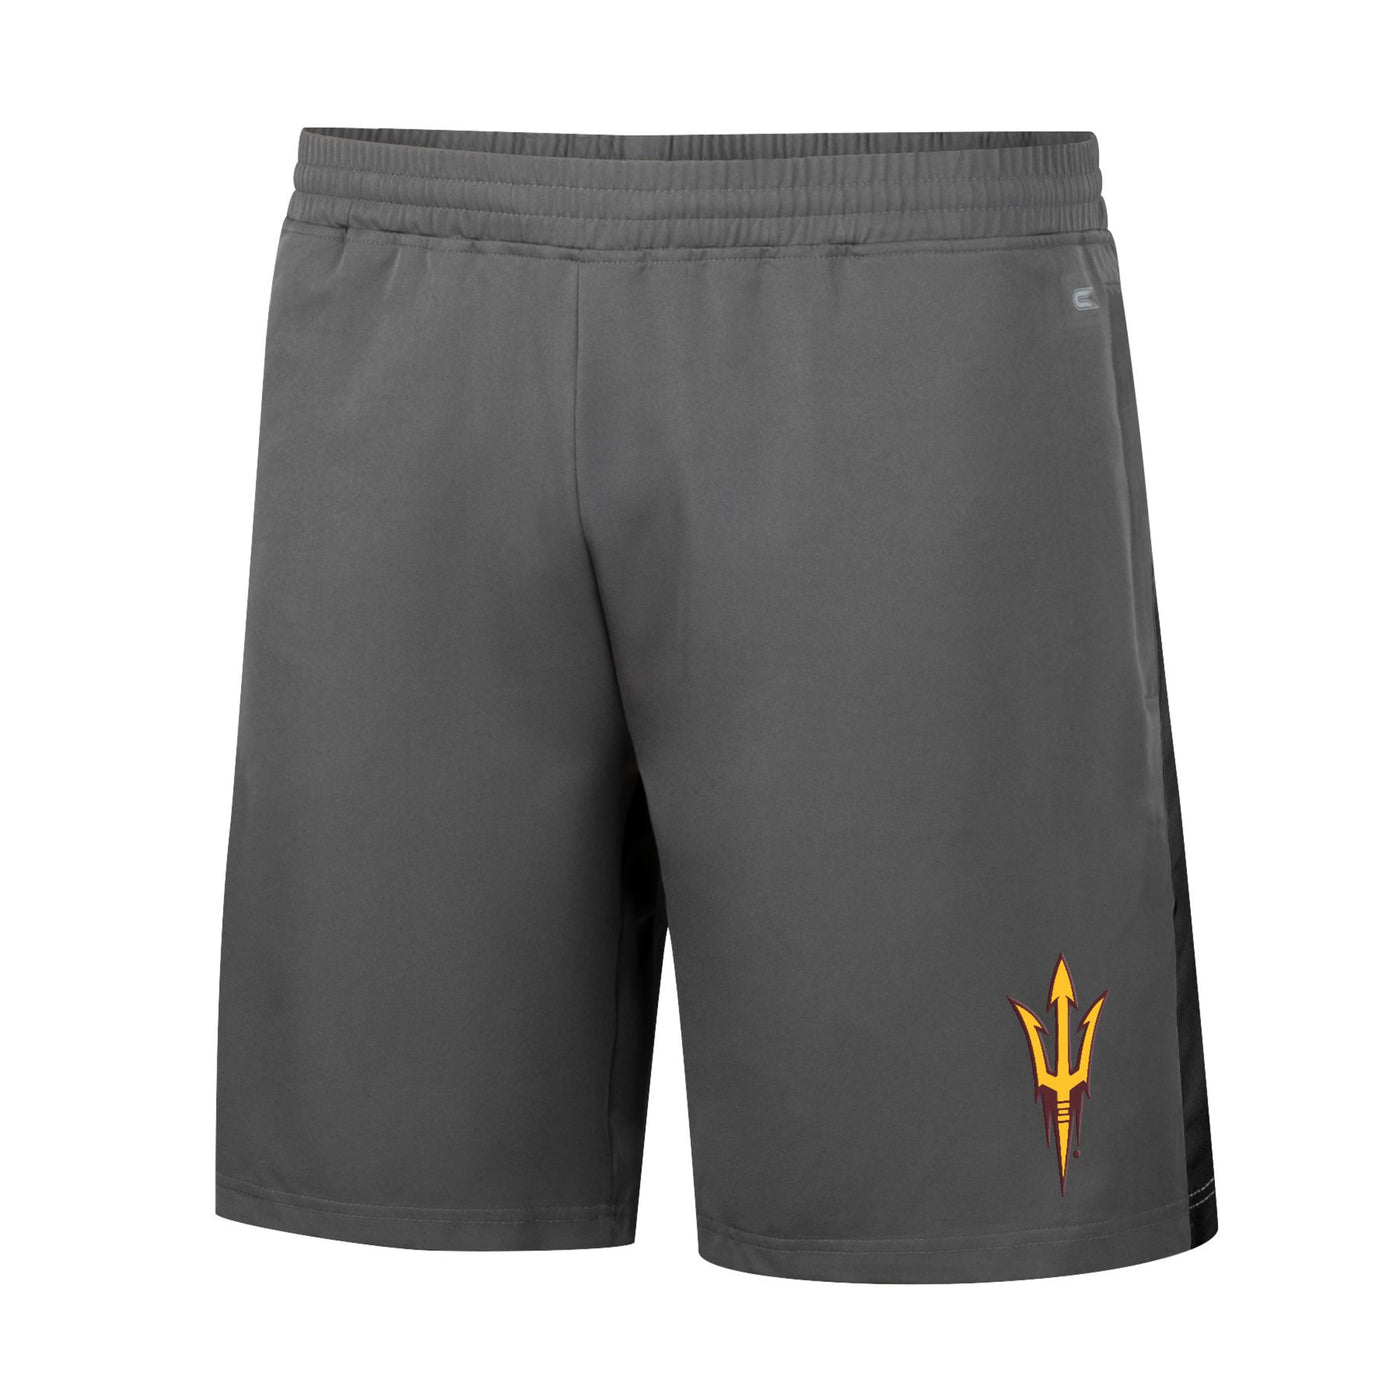 ASU gray shorts with elastic band waist and a pitchfork on the leg